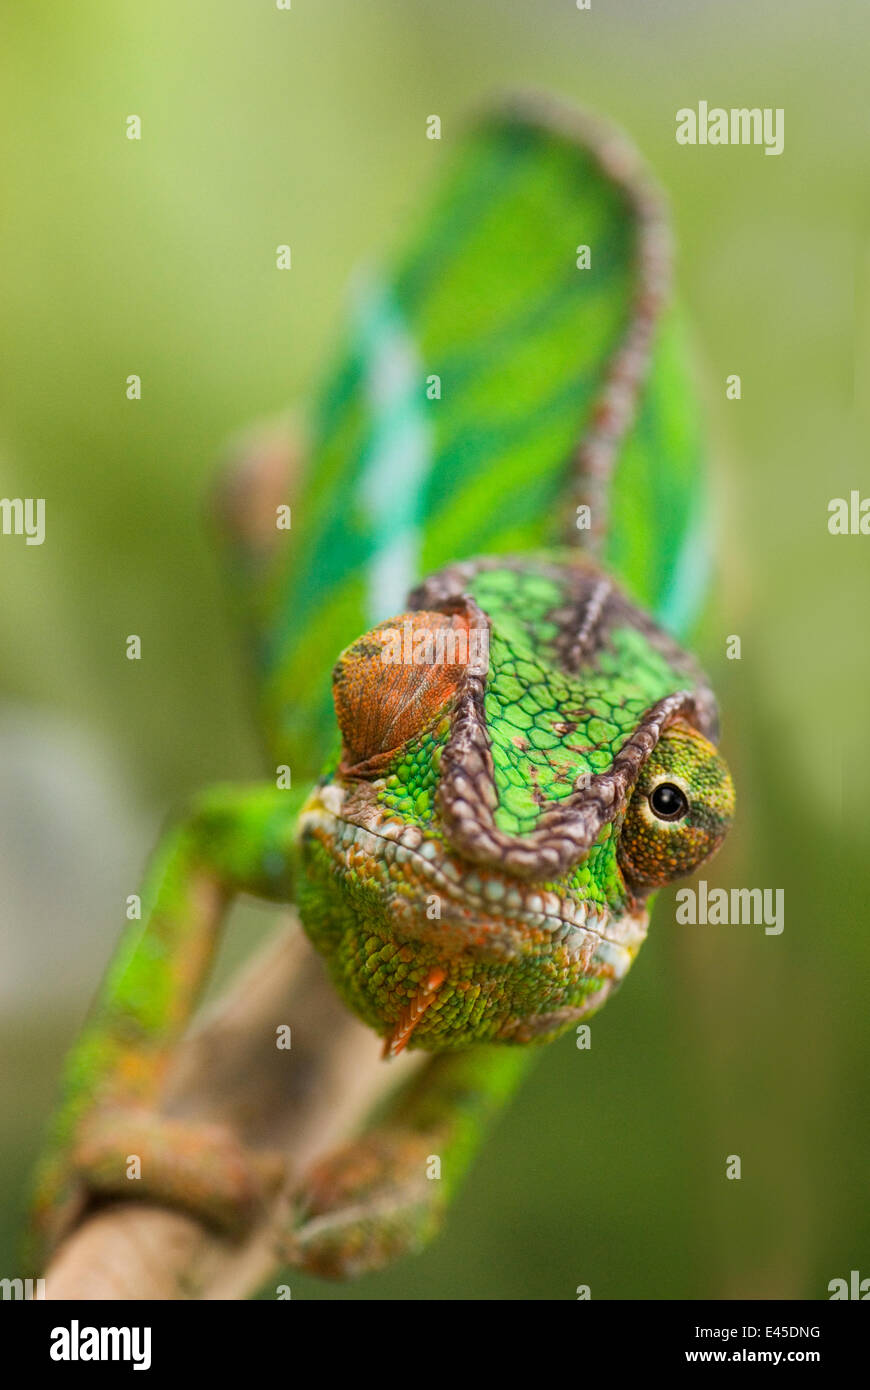 Panther chameleon (Furcifer pardalis) with eyes facing different direction, Madagascar Stock Photo